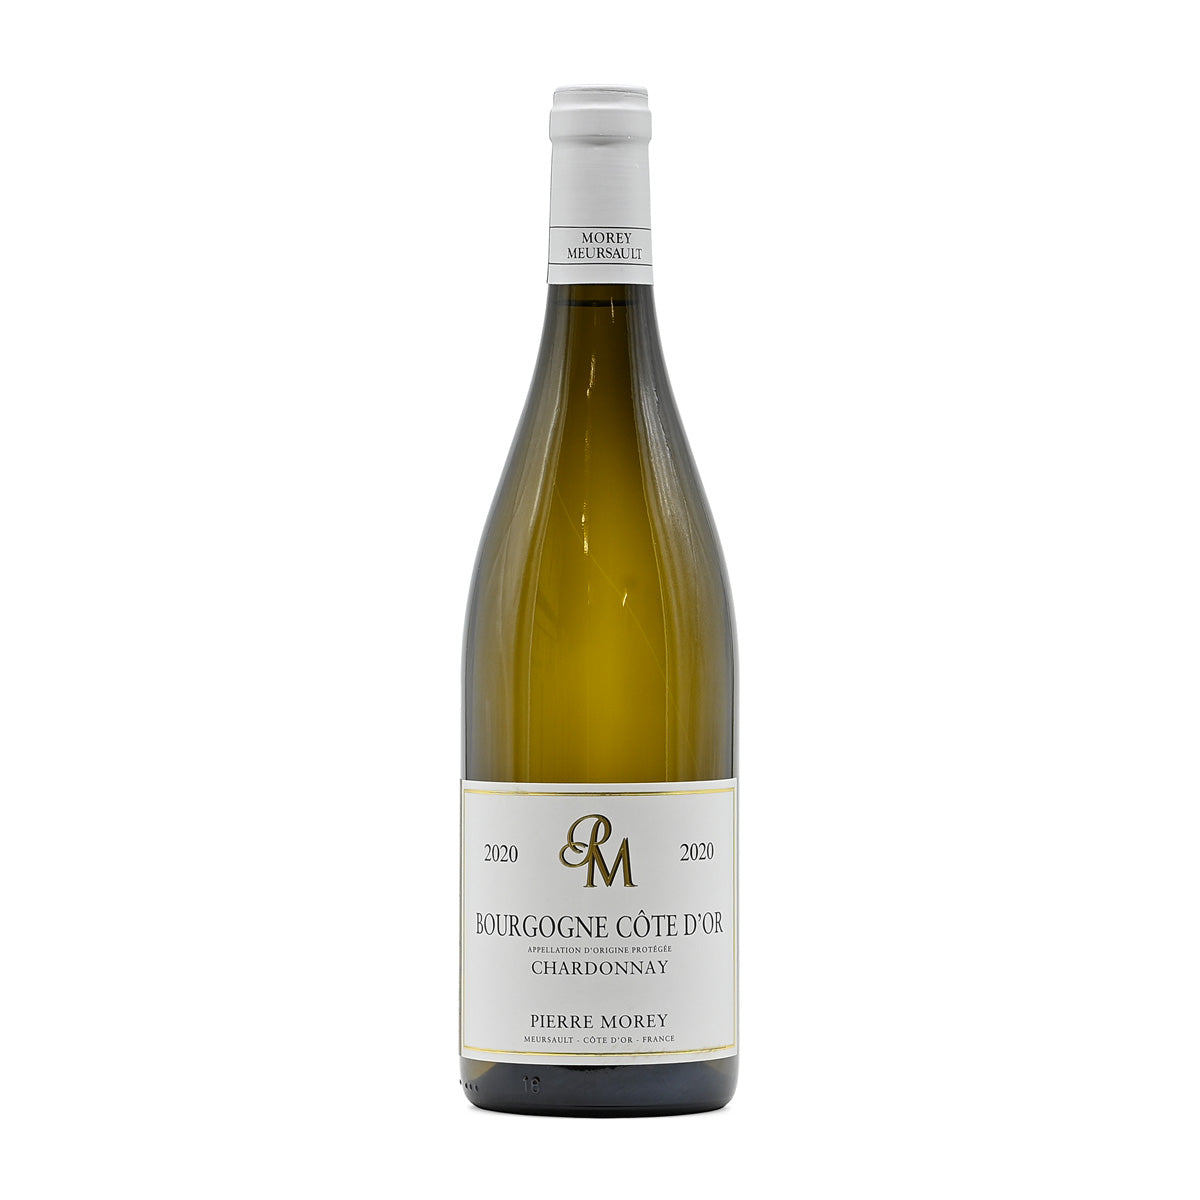 Pierre Morey Bourgogne Cote d'Or Chardonnay 2020, 750ml French red wine, made from Chardonnay, from Bourgogne Cote d'Or, Burgundy, France – GDV Fine Wines, Hong Kong